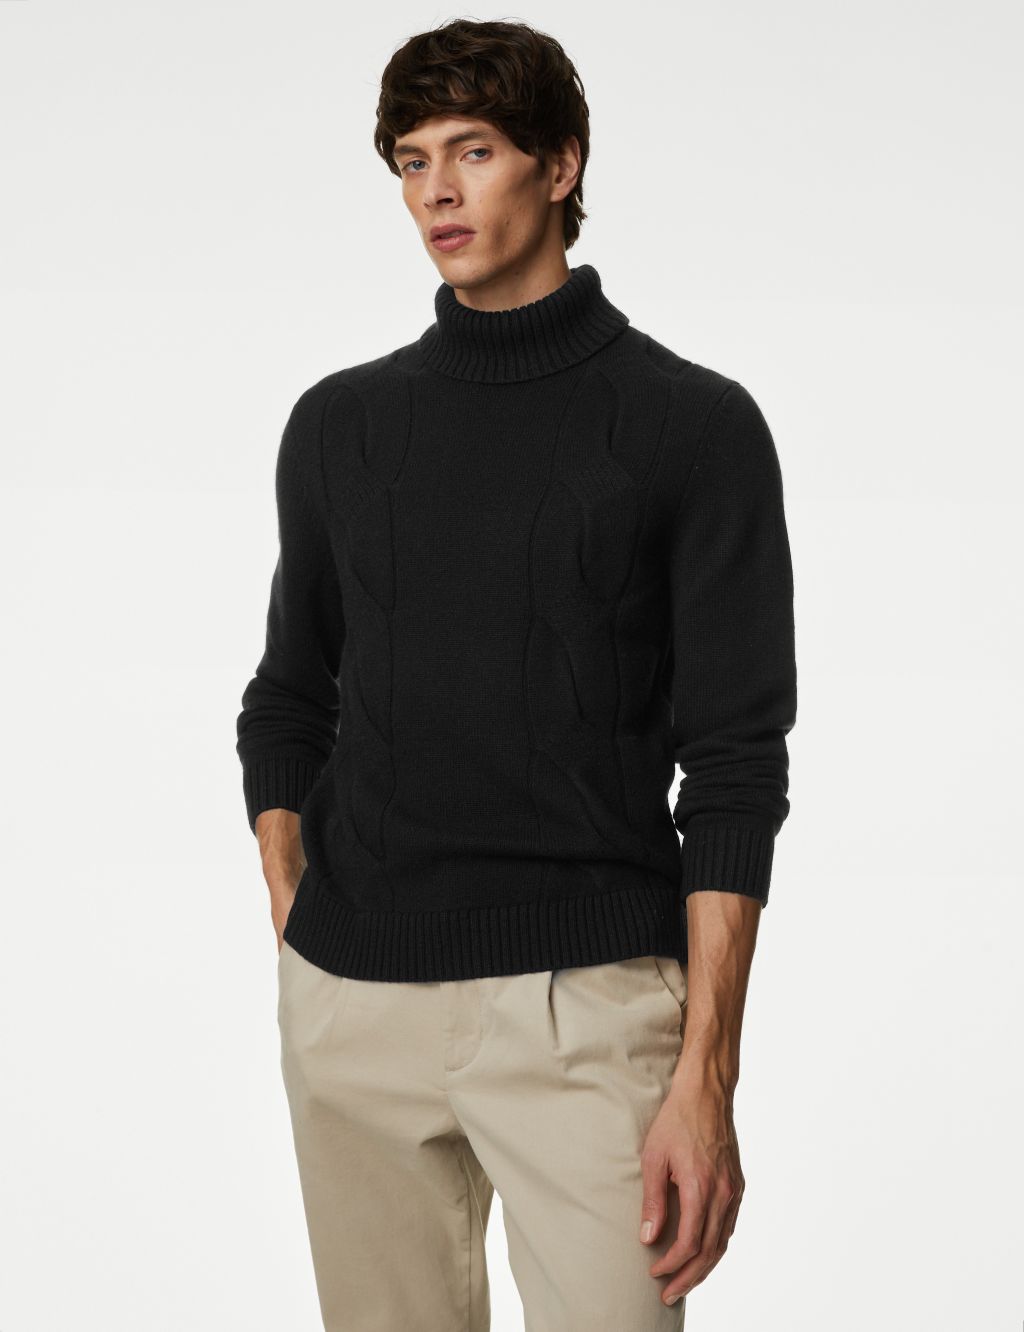 Extra Fine Merino Wool Jumper with Cashmere image 4